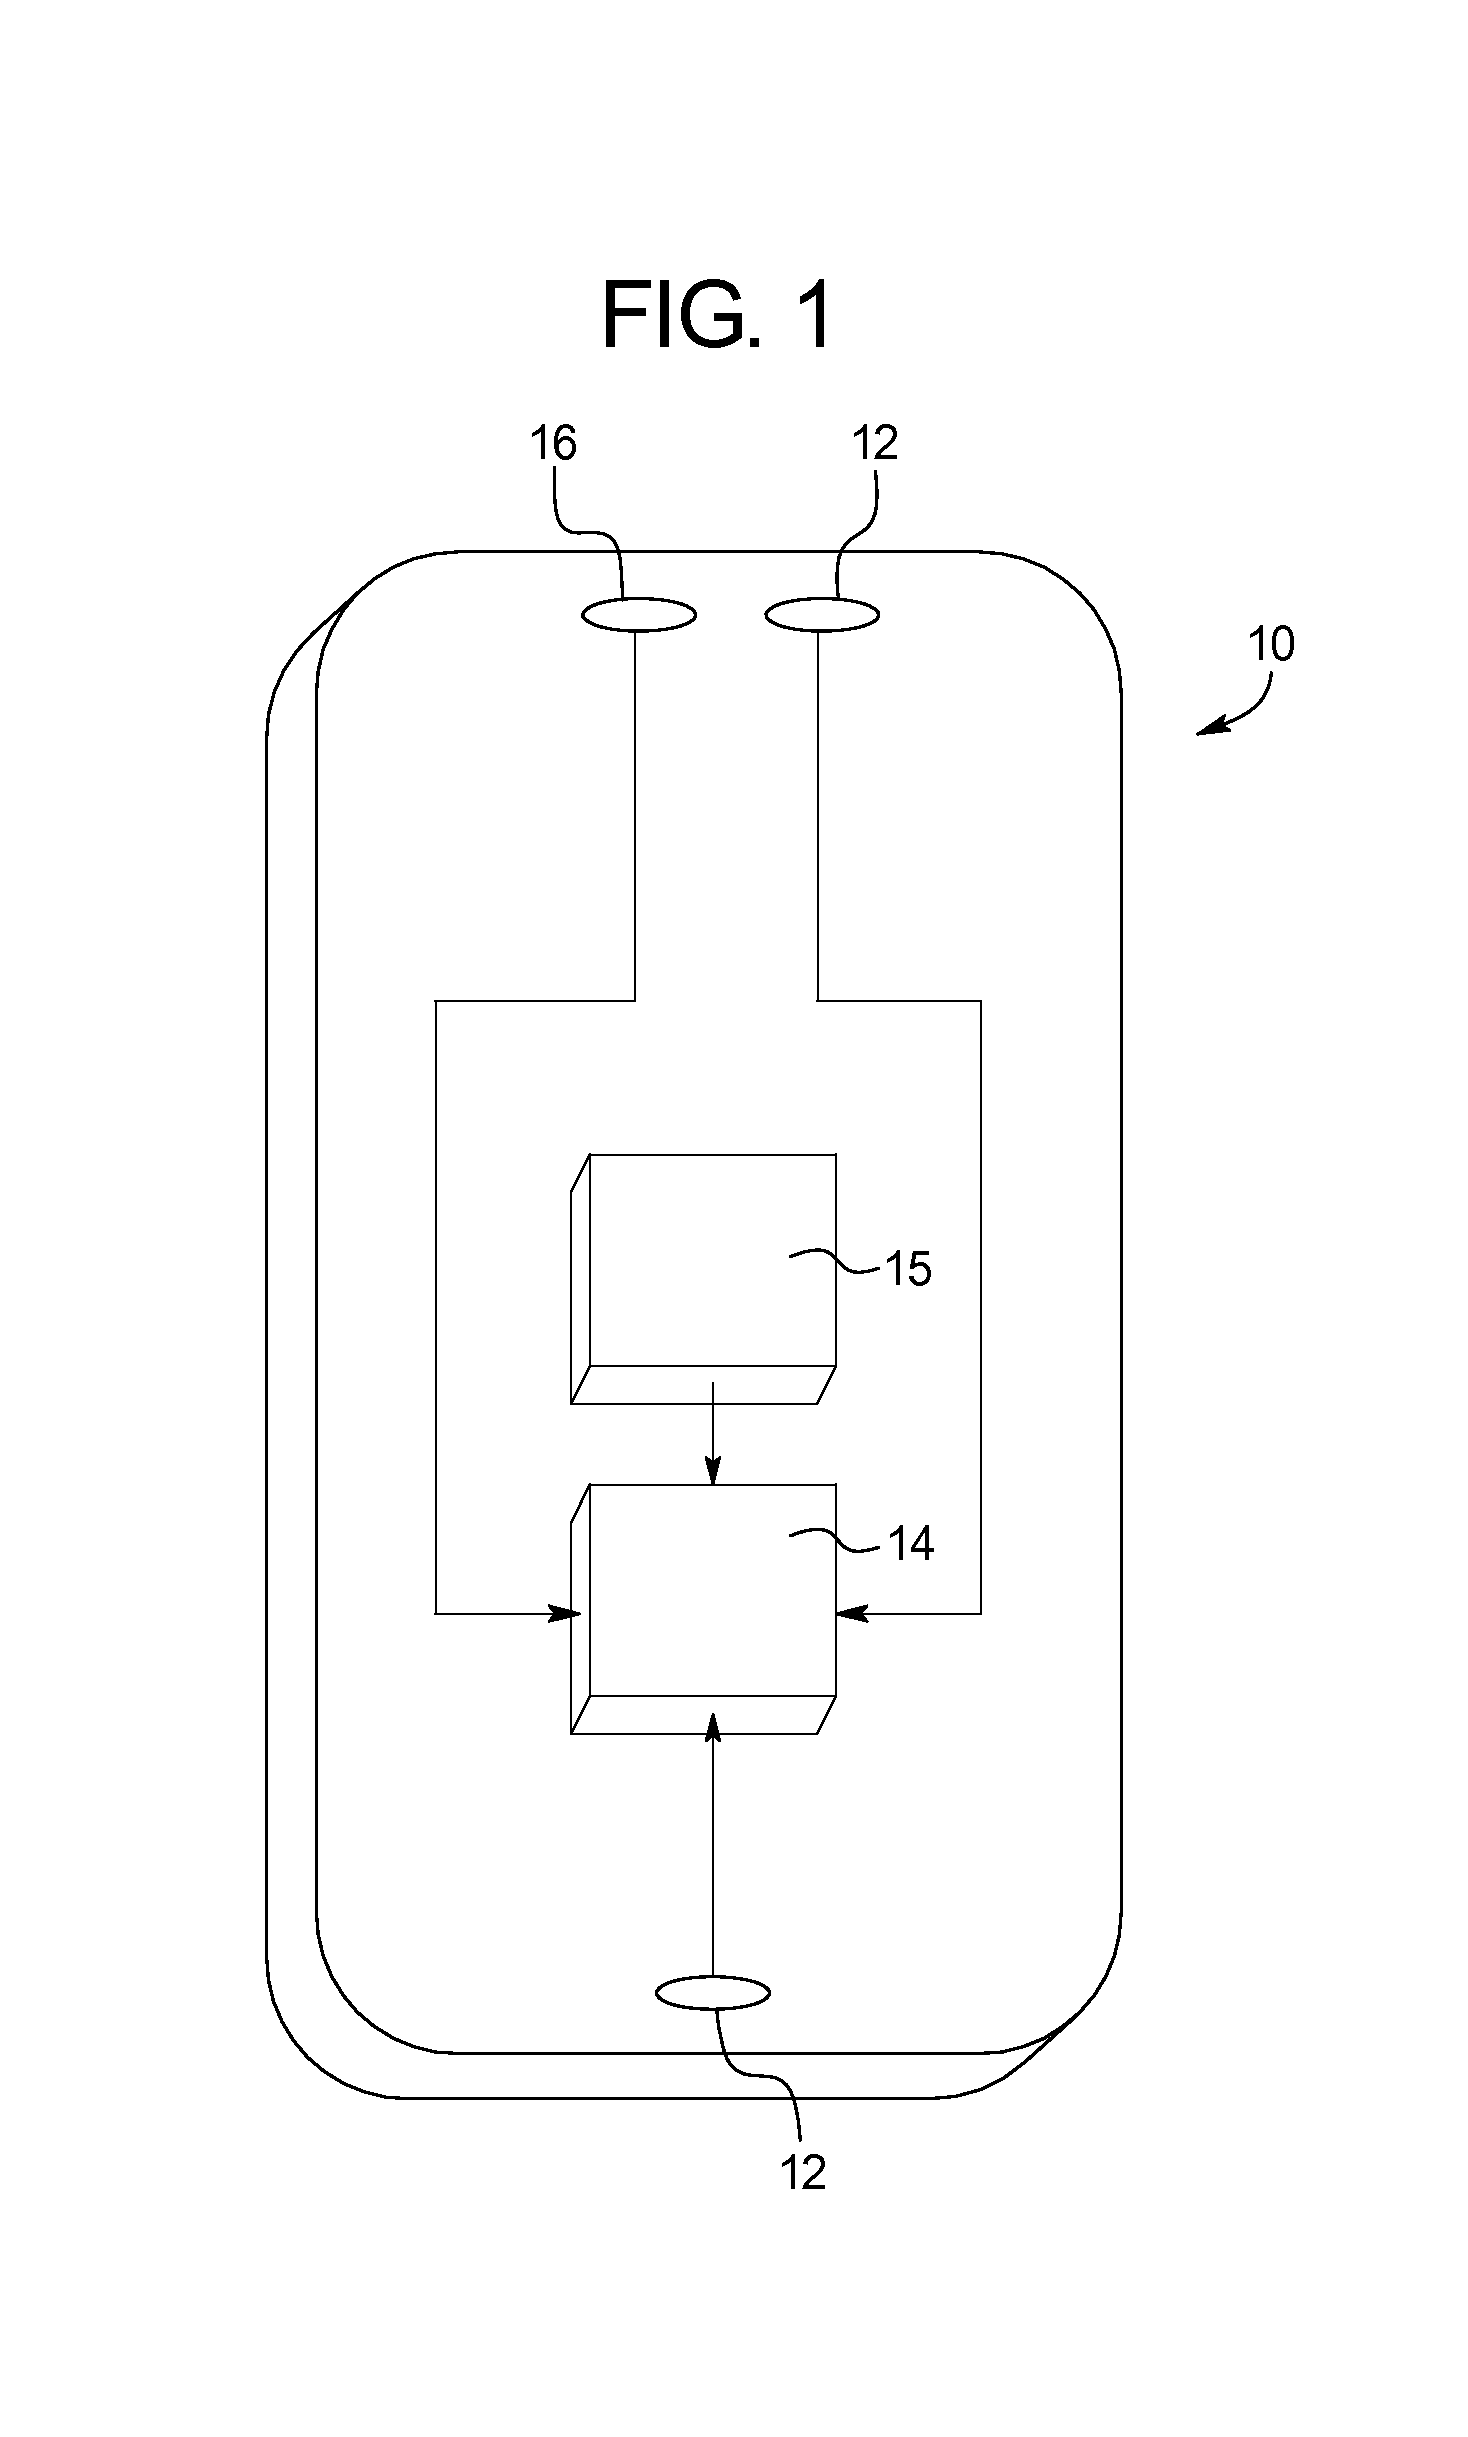 Multi-microphone noise reduction using enhanced reference noise signal